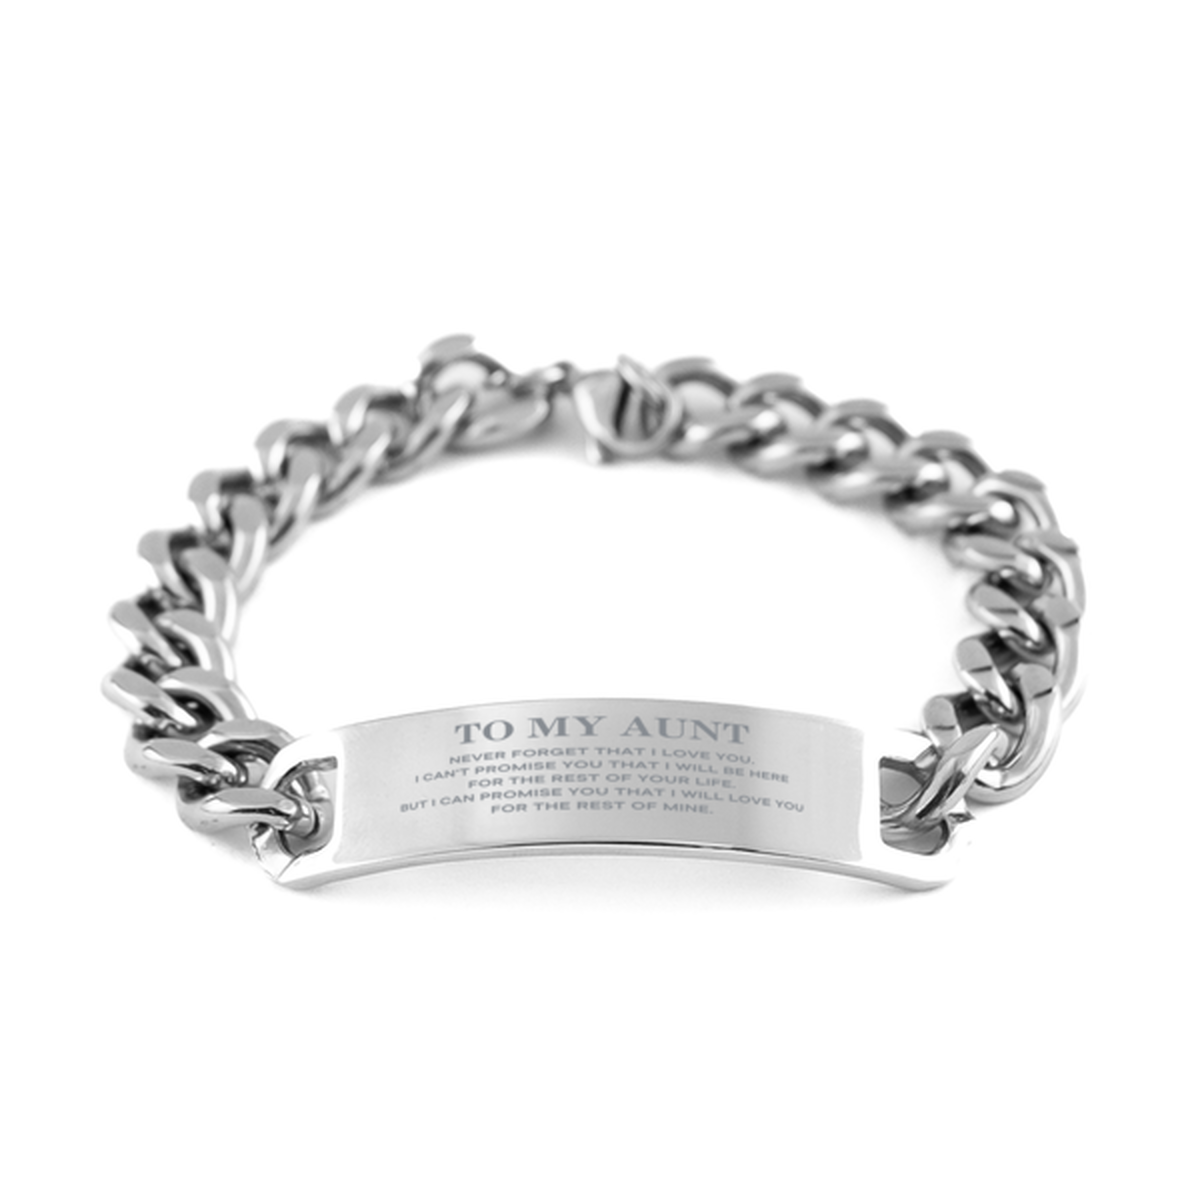 To My Aunt Gifts, I will love you for the rest of mine, Love Aunt Bracelet, Birthday Christmas Unique Cuban Chain Stainless Steel Bracelet For Aunt